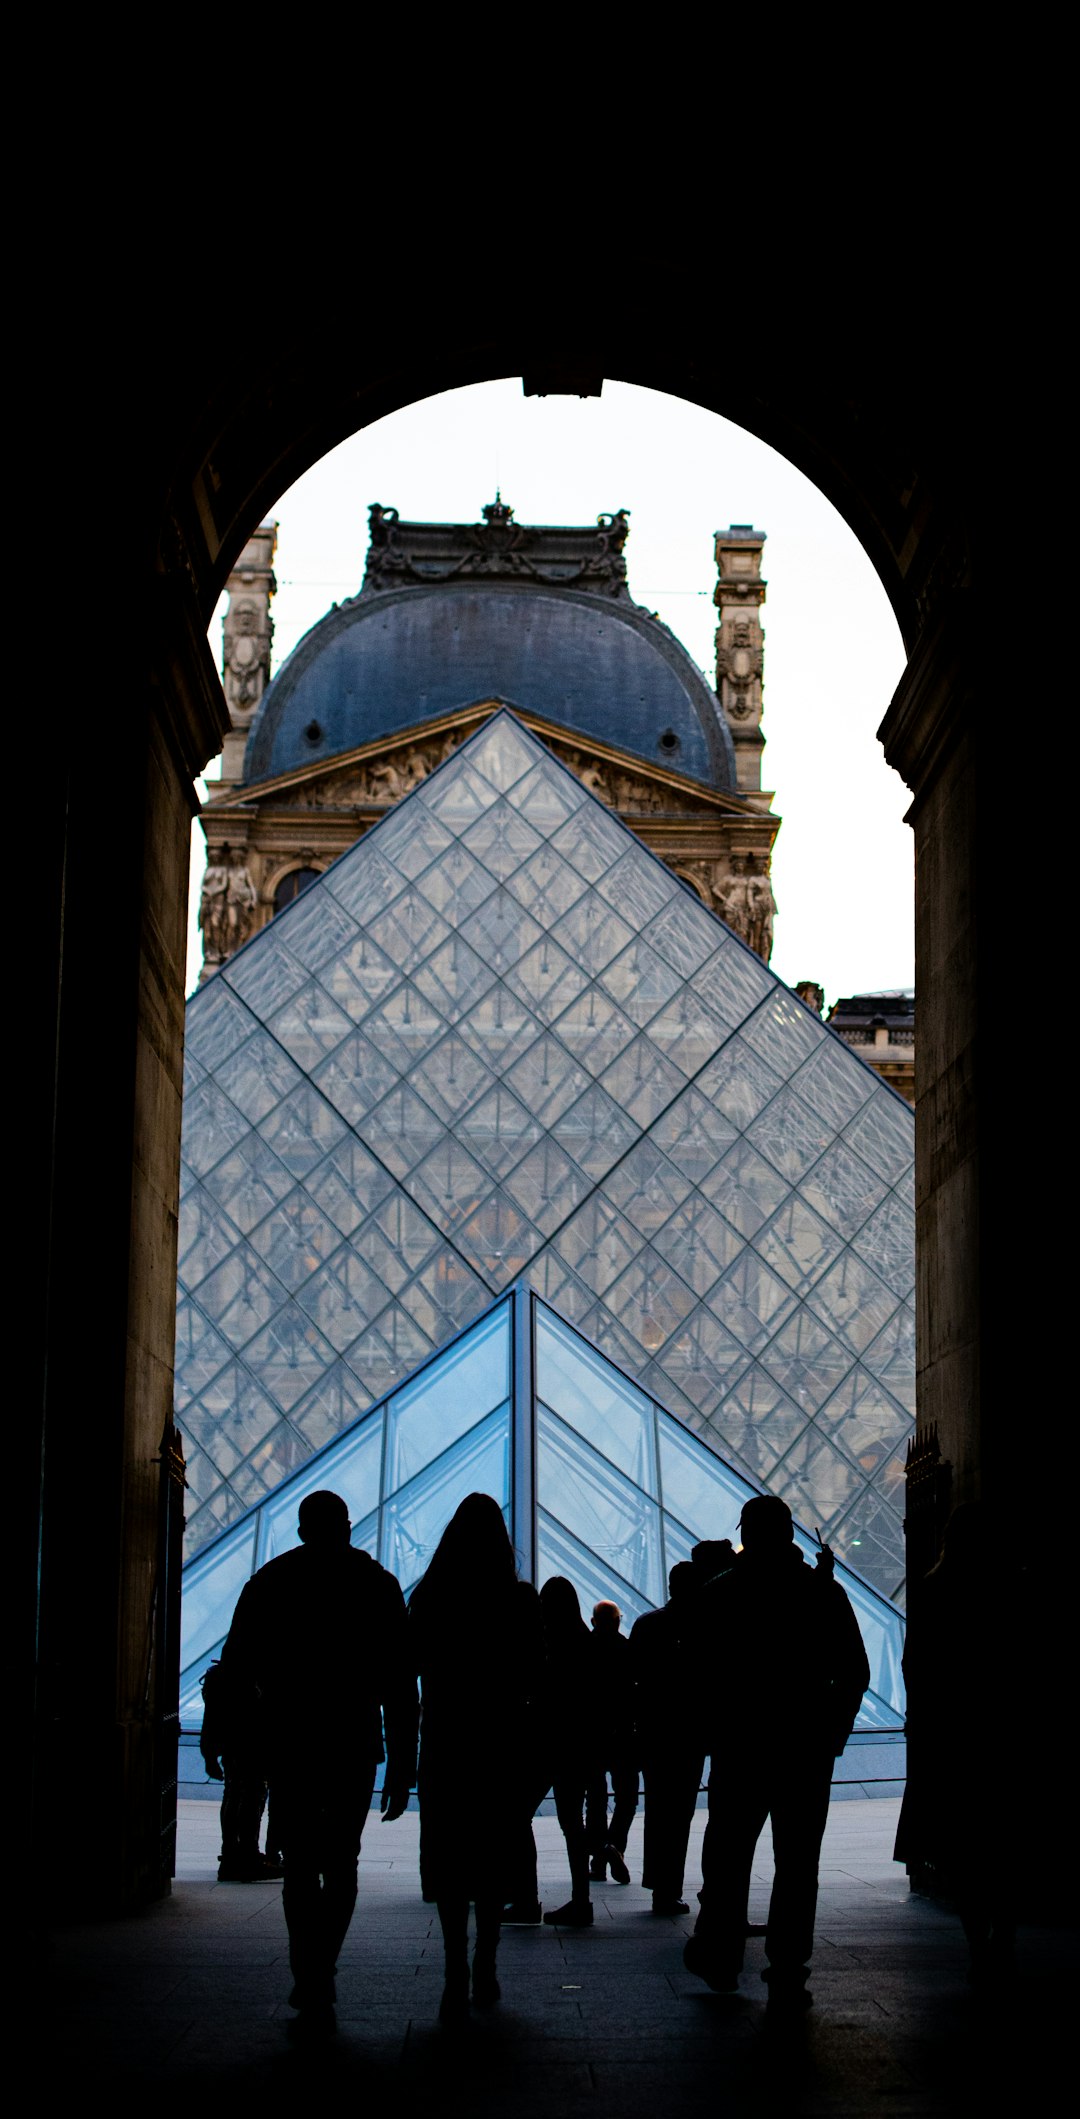 Travel Tips and Stories of Louvre in France